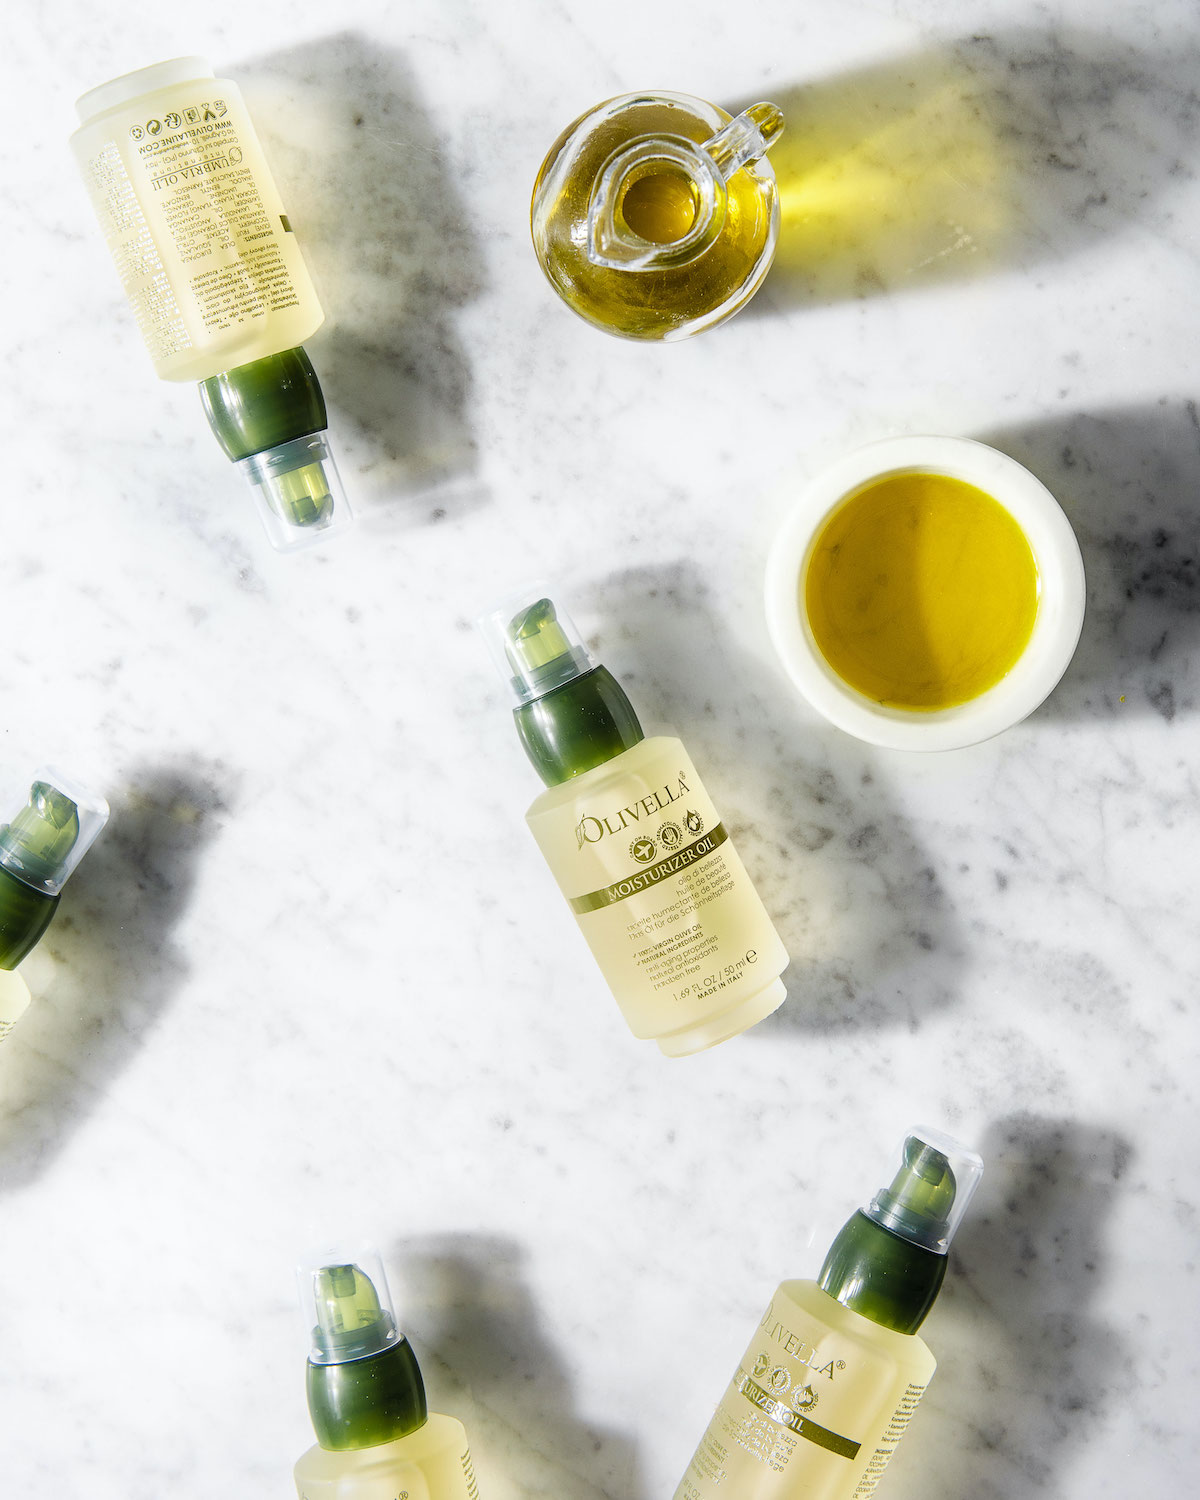 Olivella Moisturizer Oil from 100% Ultra Purified Virgin Olive Oil